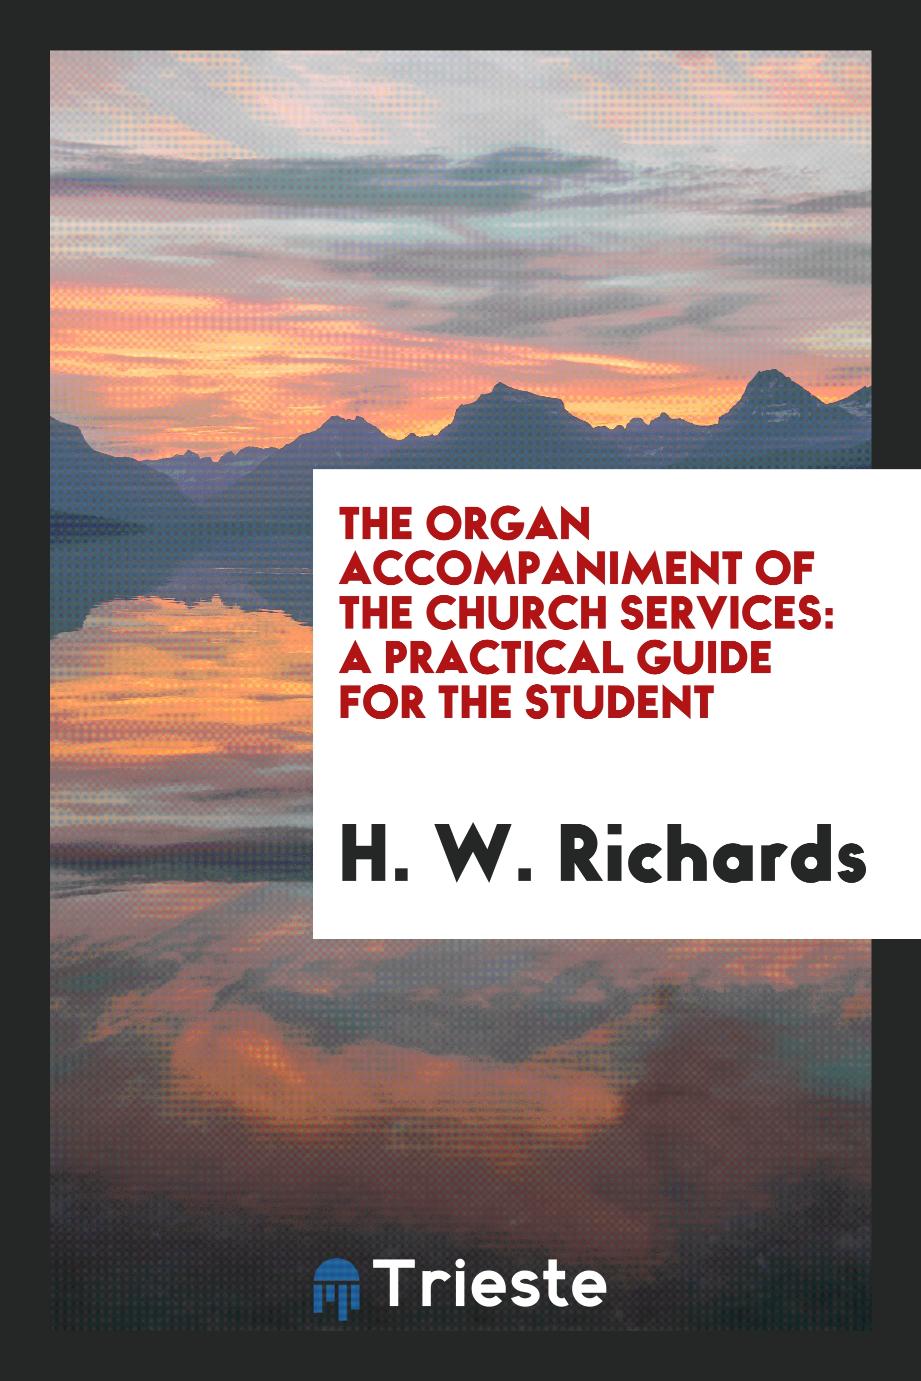 The organ accompaniment of the church services: a practical guide for the student